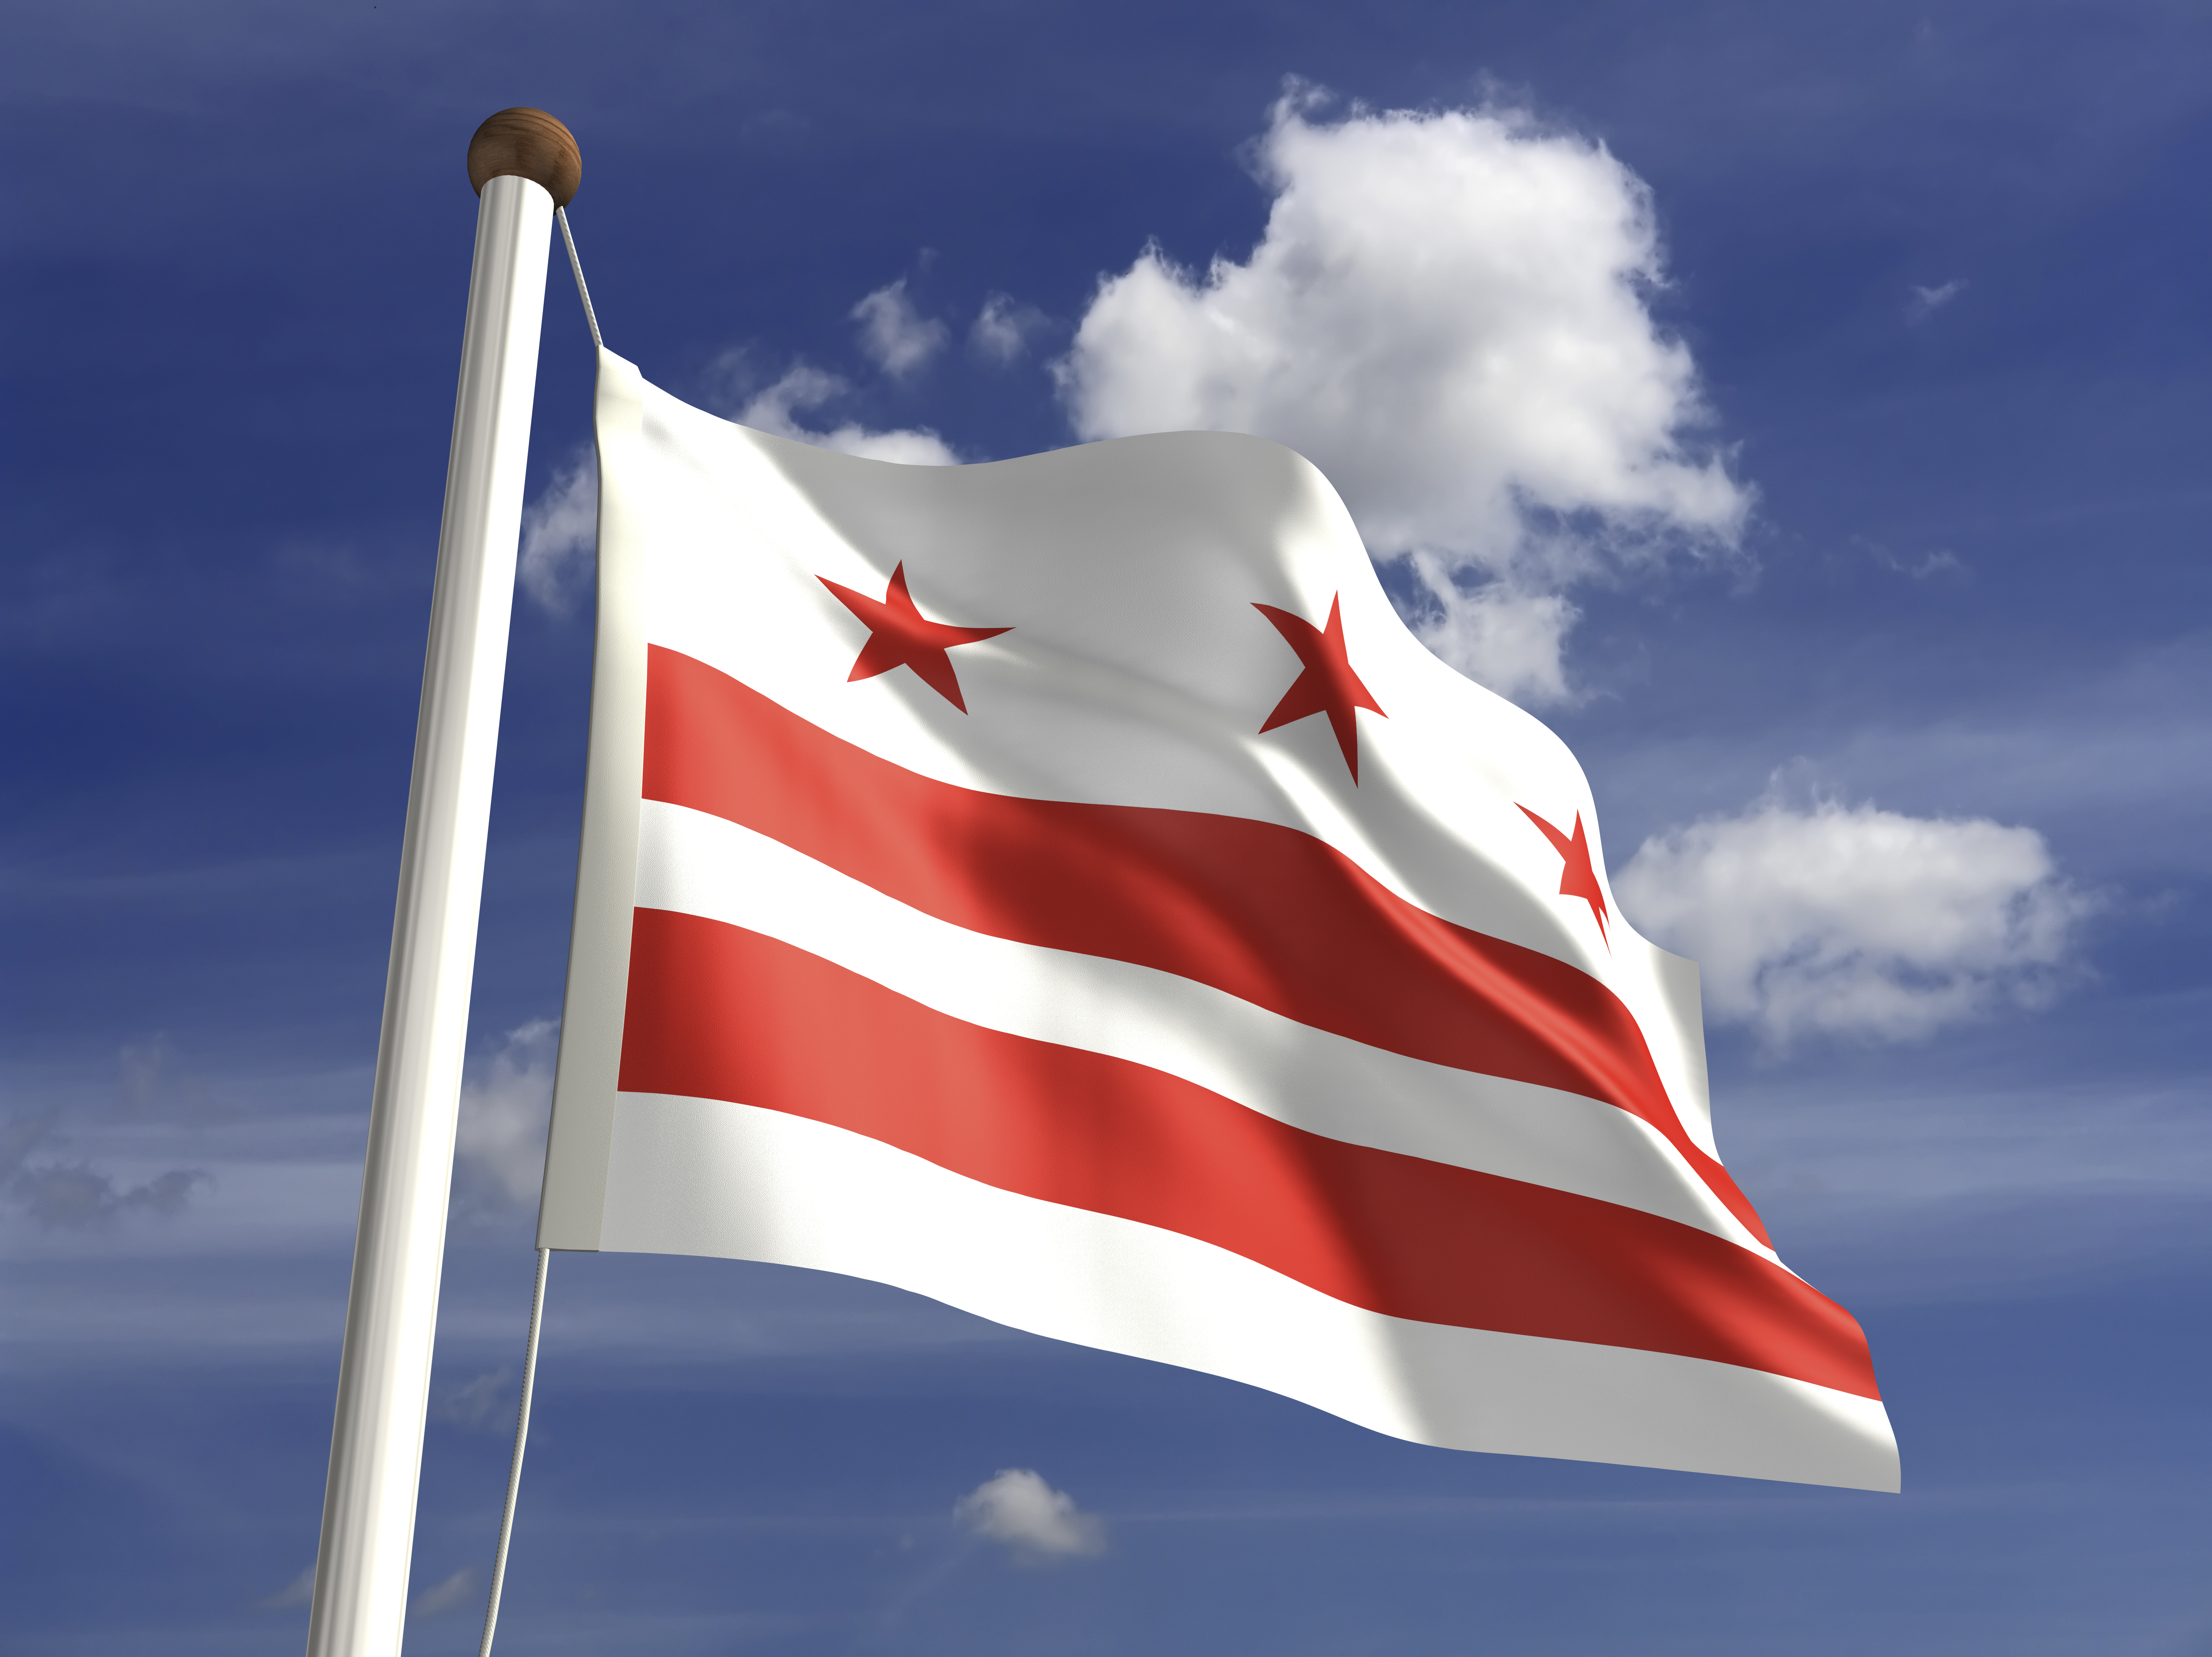 District of Columbia flag (with clipping path)